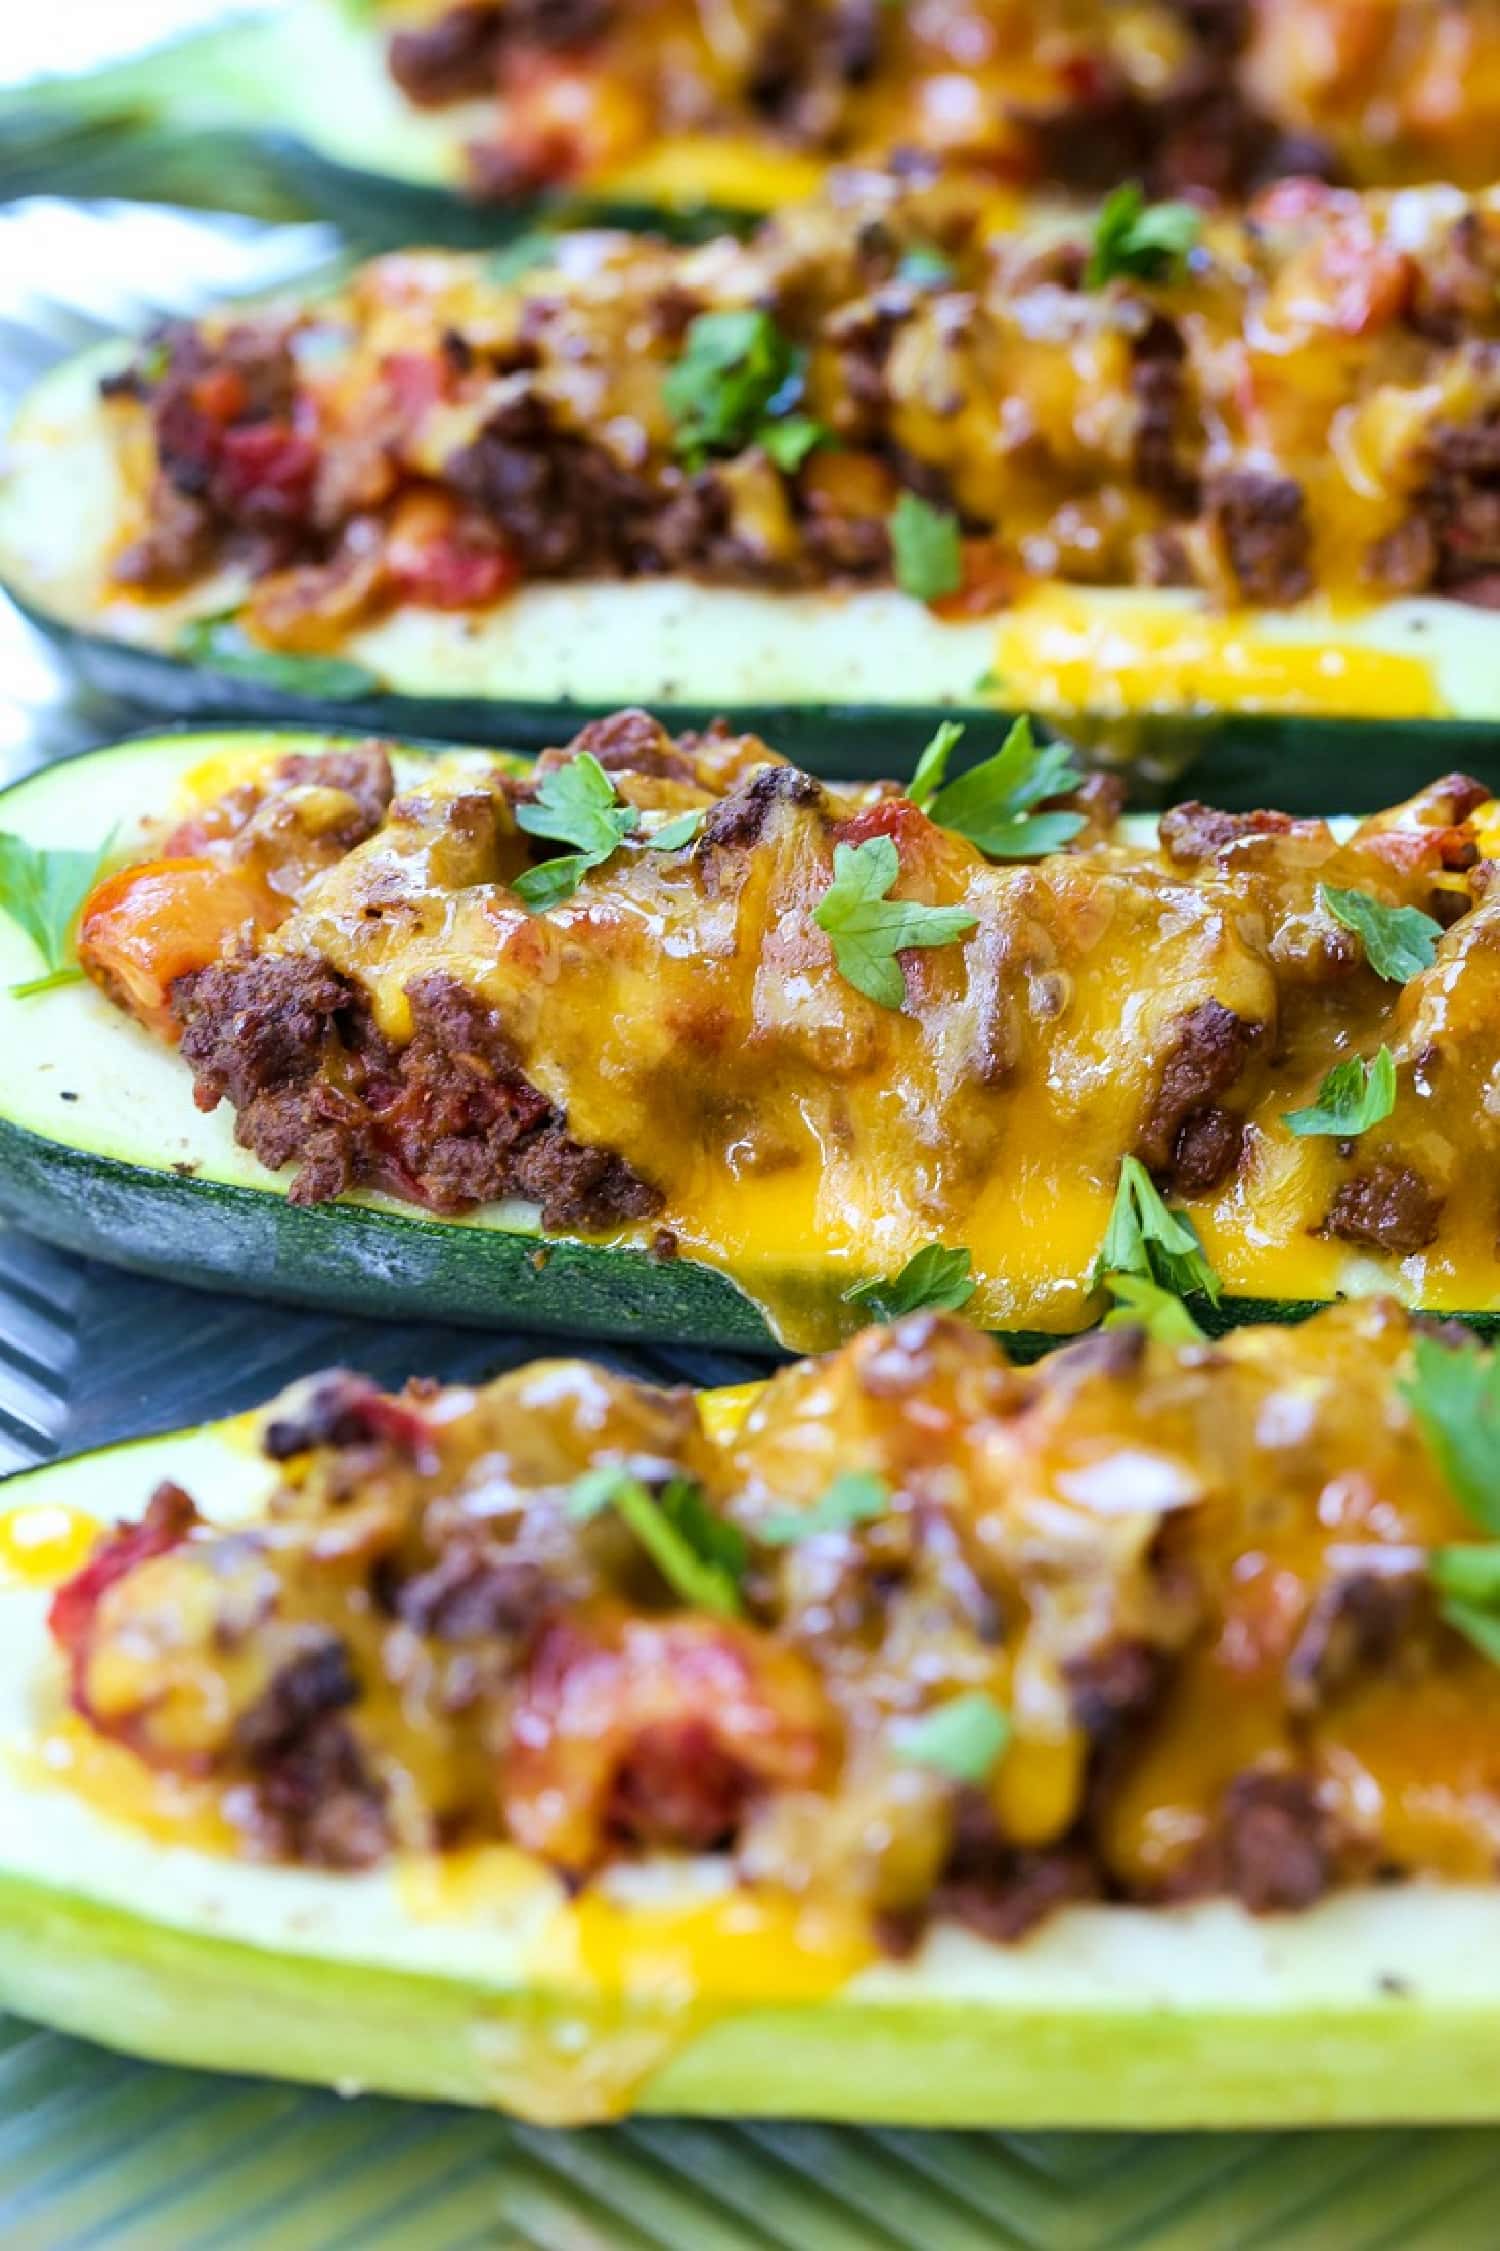 zucchini boats filled with taco filling an topped with cheese